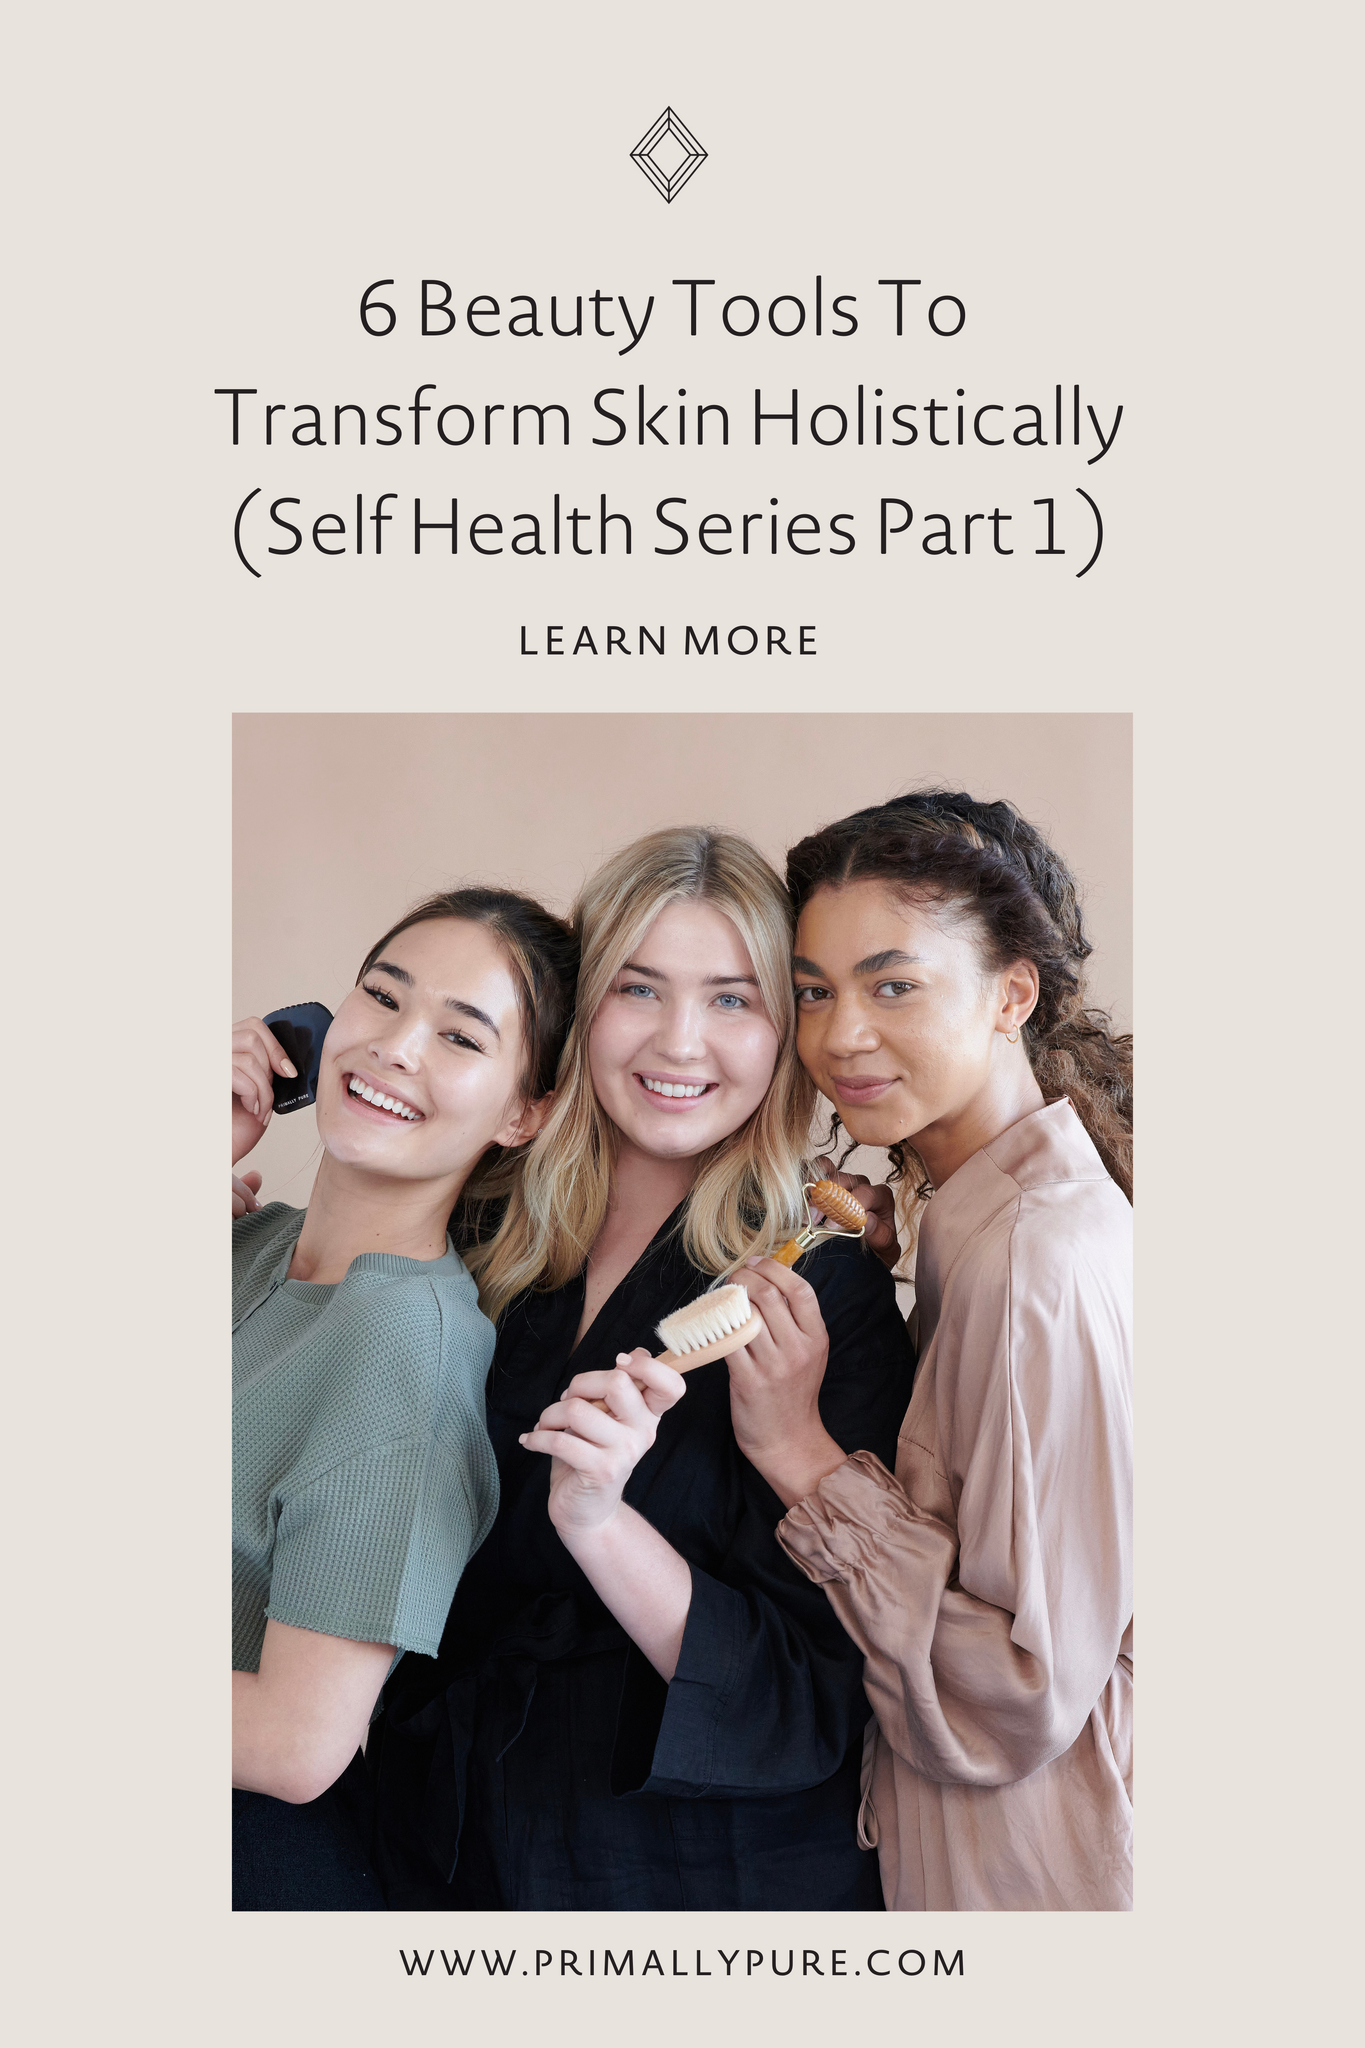 6 Beauty Tools To Transform Skin Health Holistically (Self Health Series Part 1) | Primally Pure Skincare